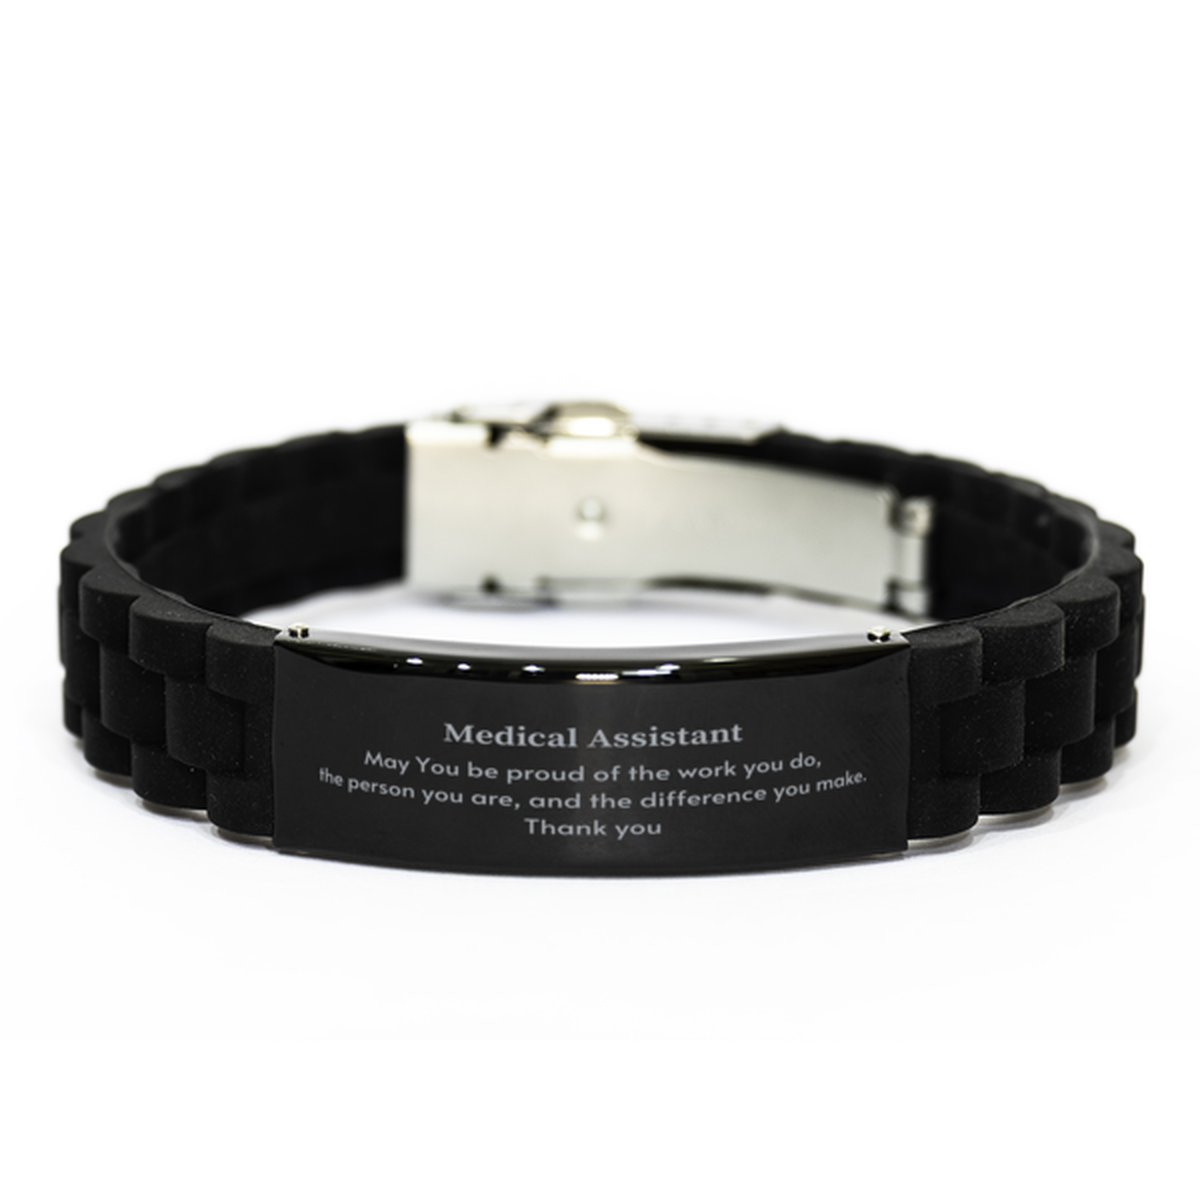 Heartwarming Black Glidelock Clasp Bracelet Retirement Coworkers Gifts for Medical Assistant, Medical Assistant May You be proud of the work you do, the person you are Gifts for Boss Men Women Friends